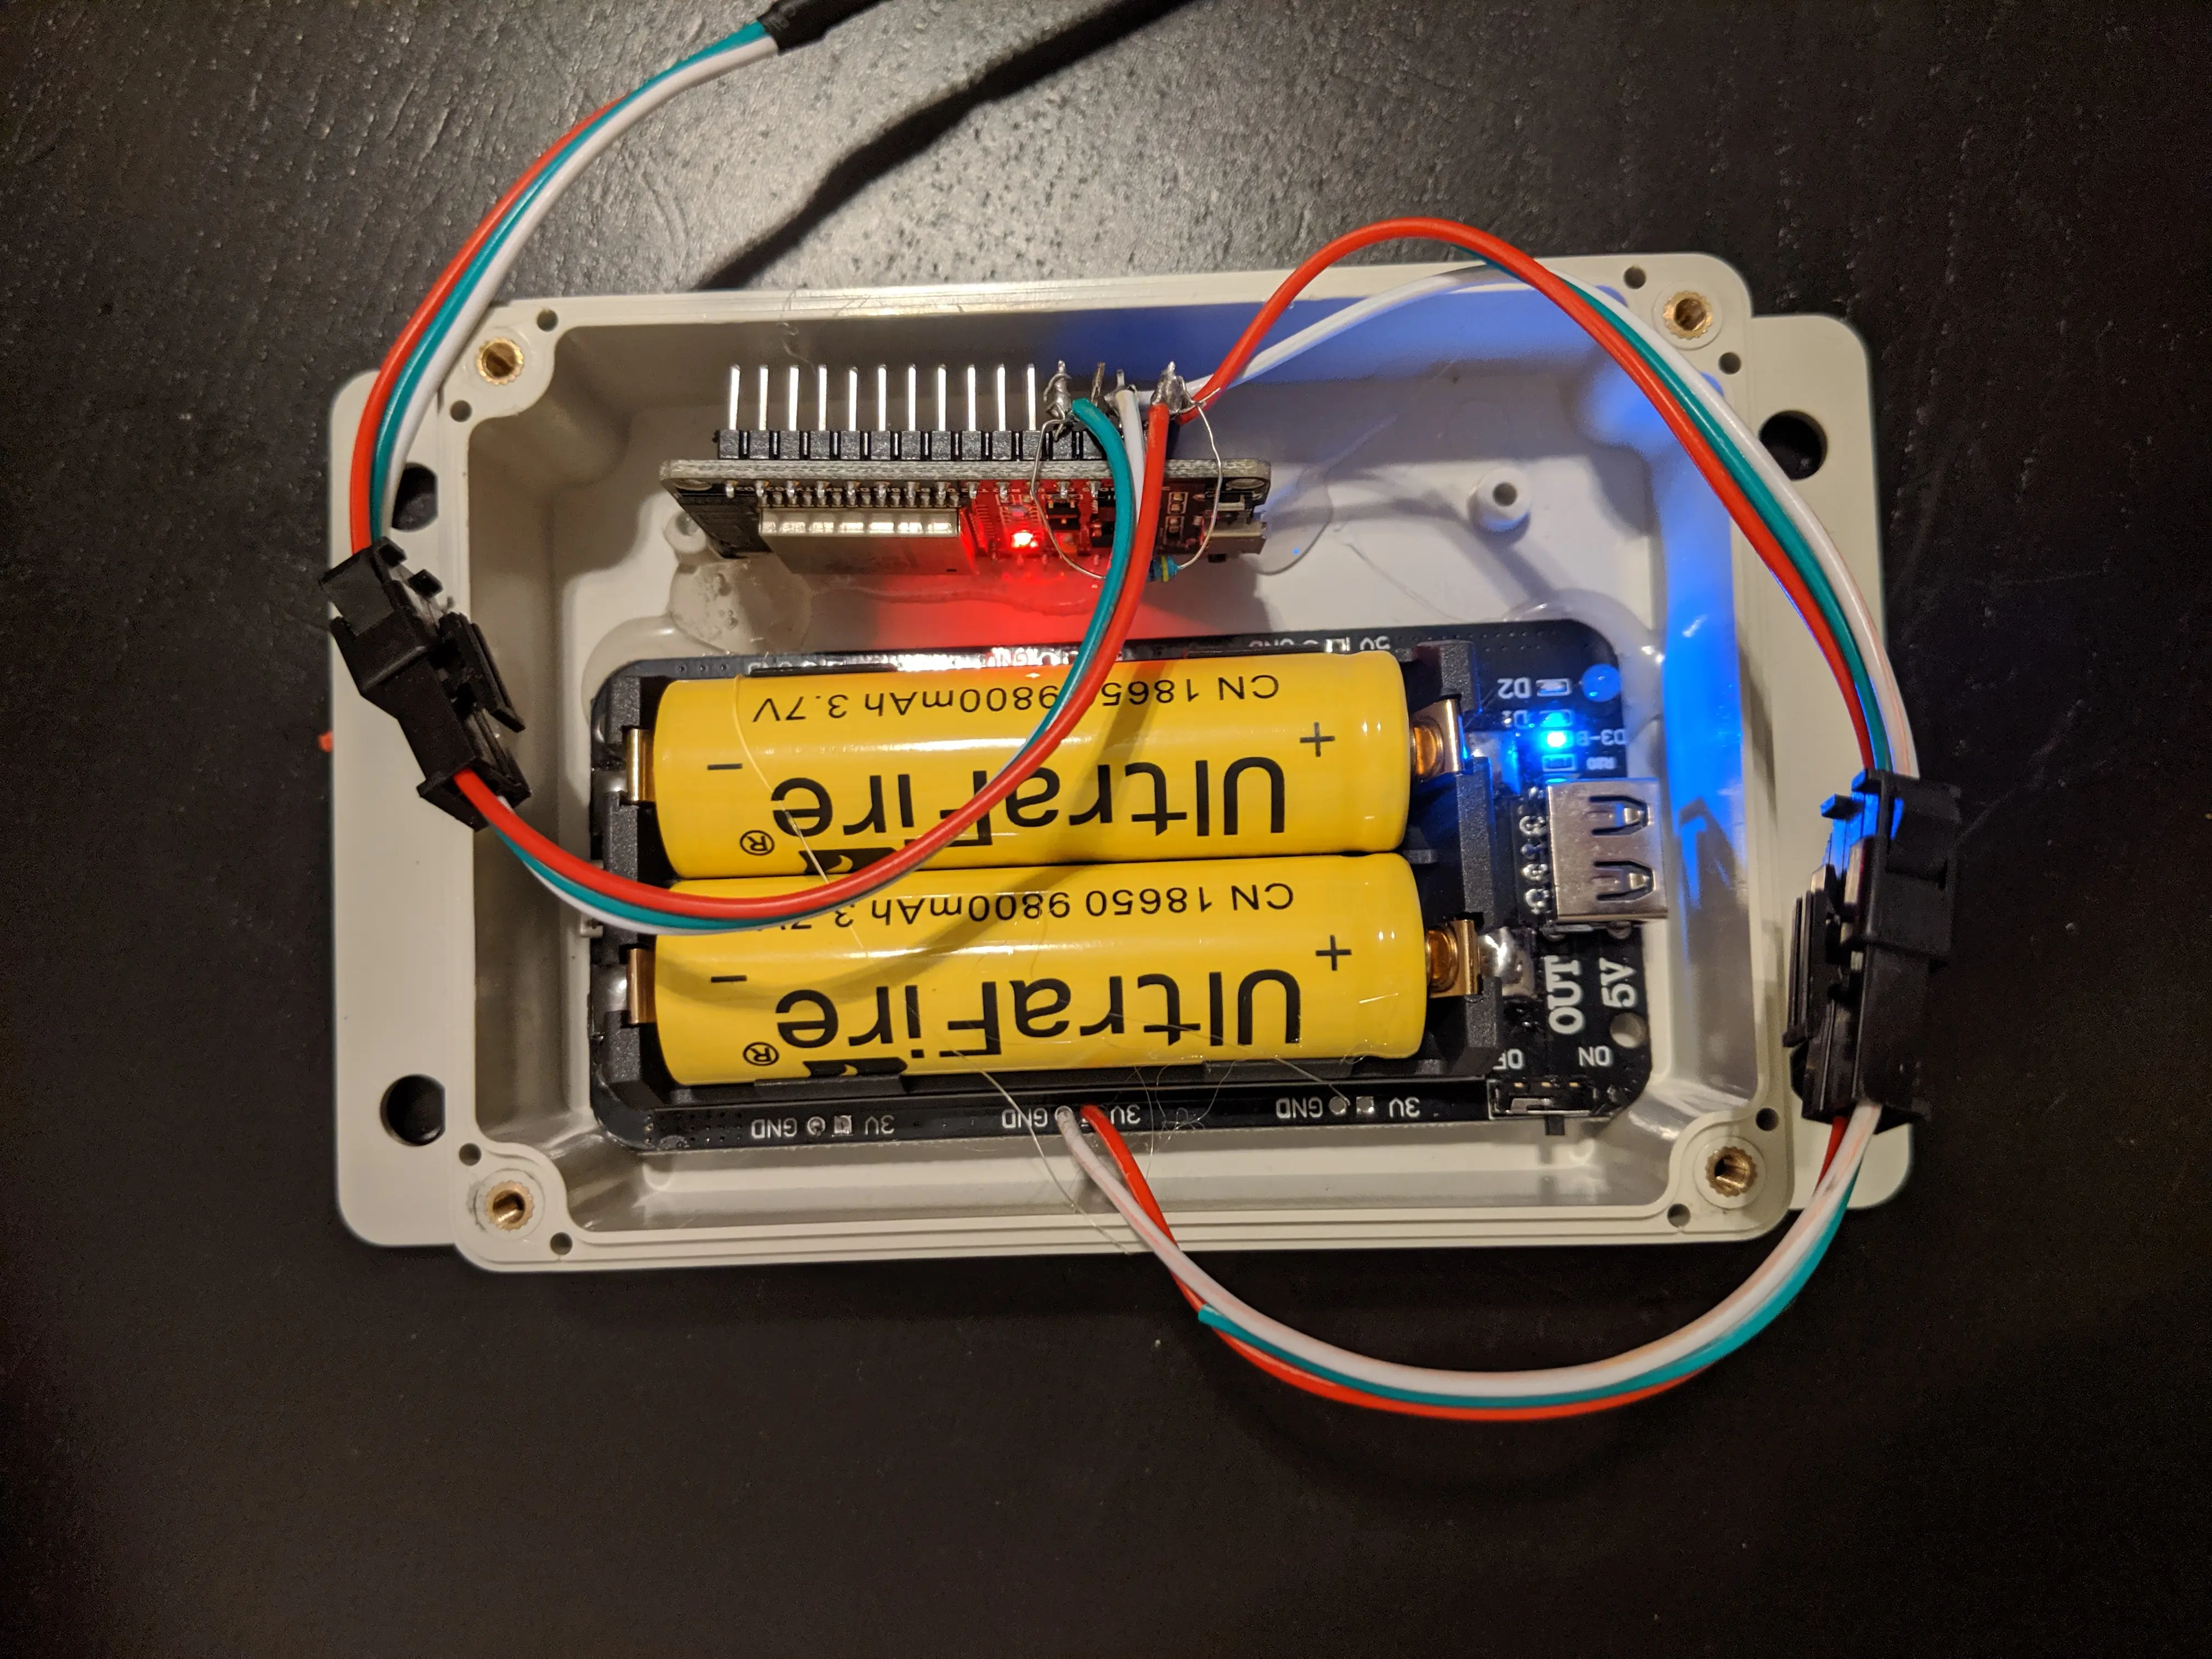 An esp32 with a battery shield in a case